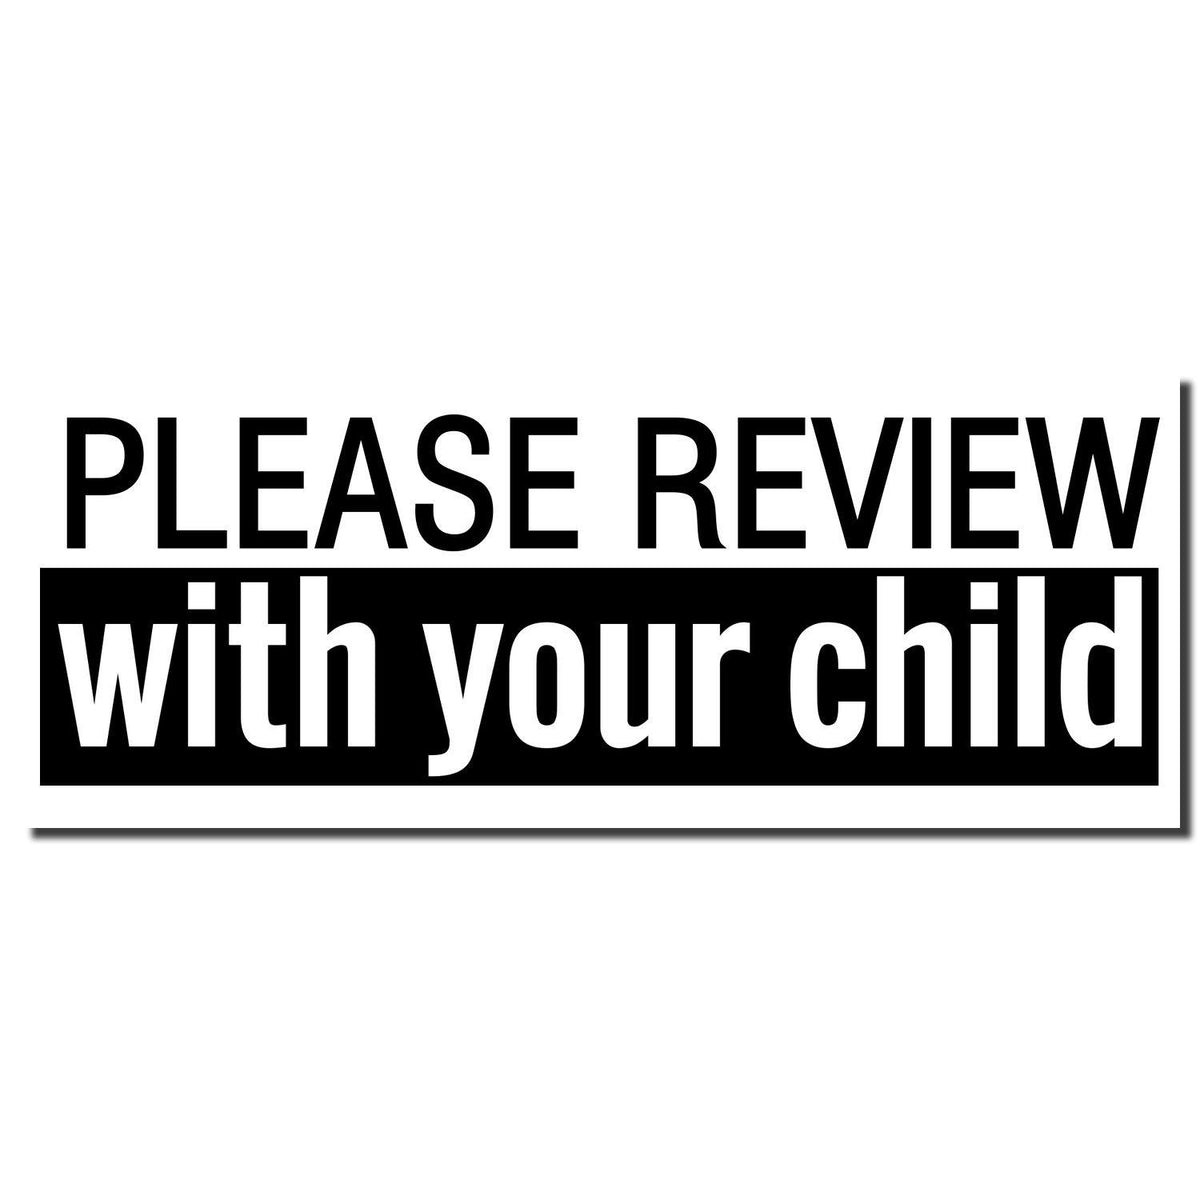 Enlarged Imprint Large Please Review with your child Rubber Stamp Sample